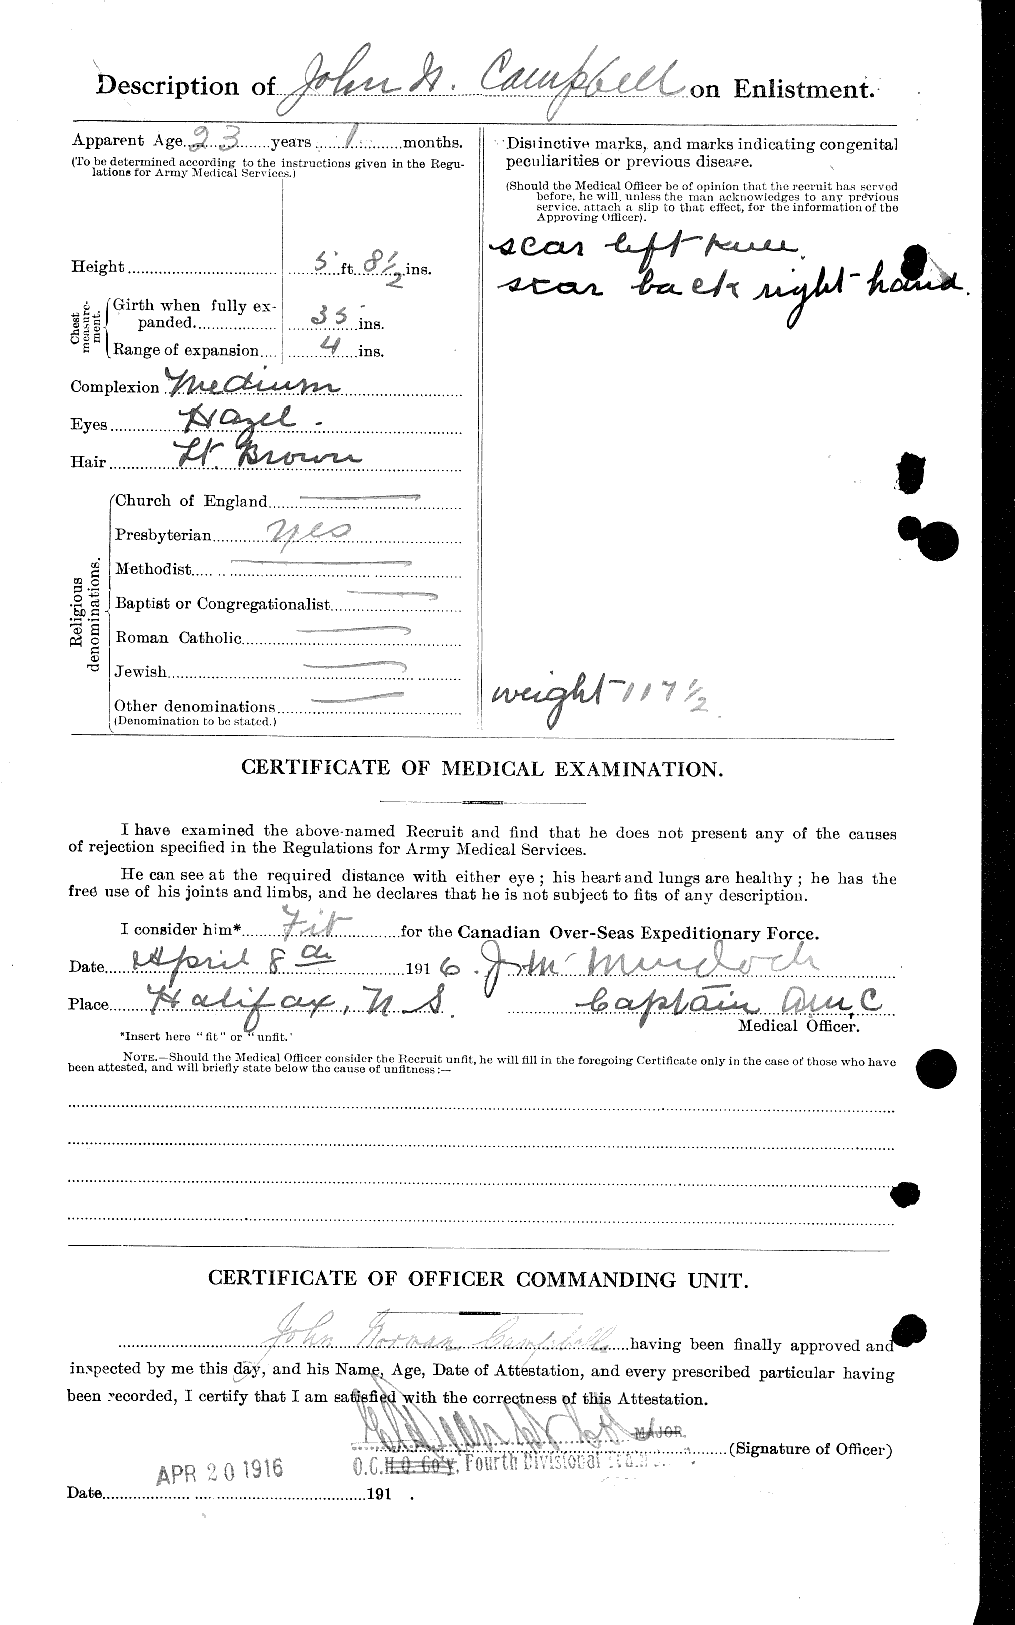 Personnel Records of the First World War - CEF 003771b